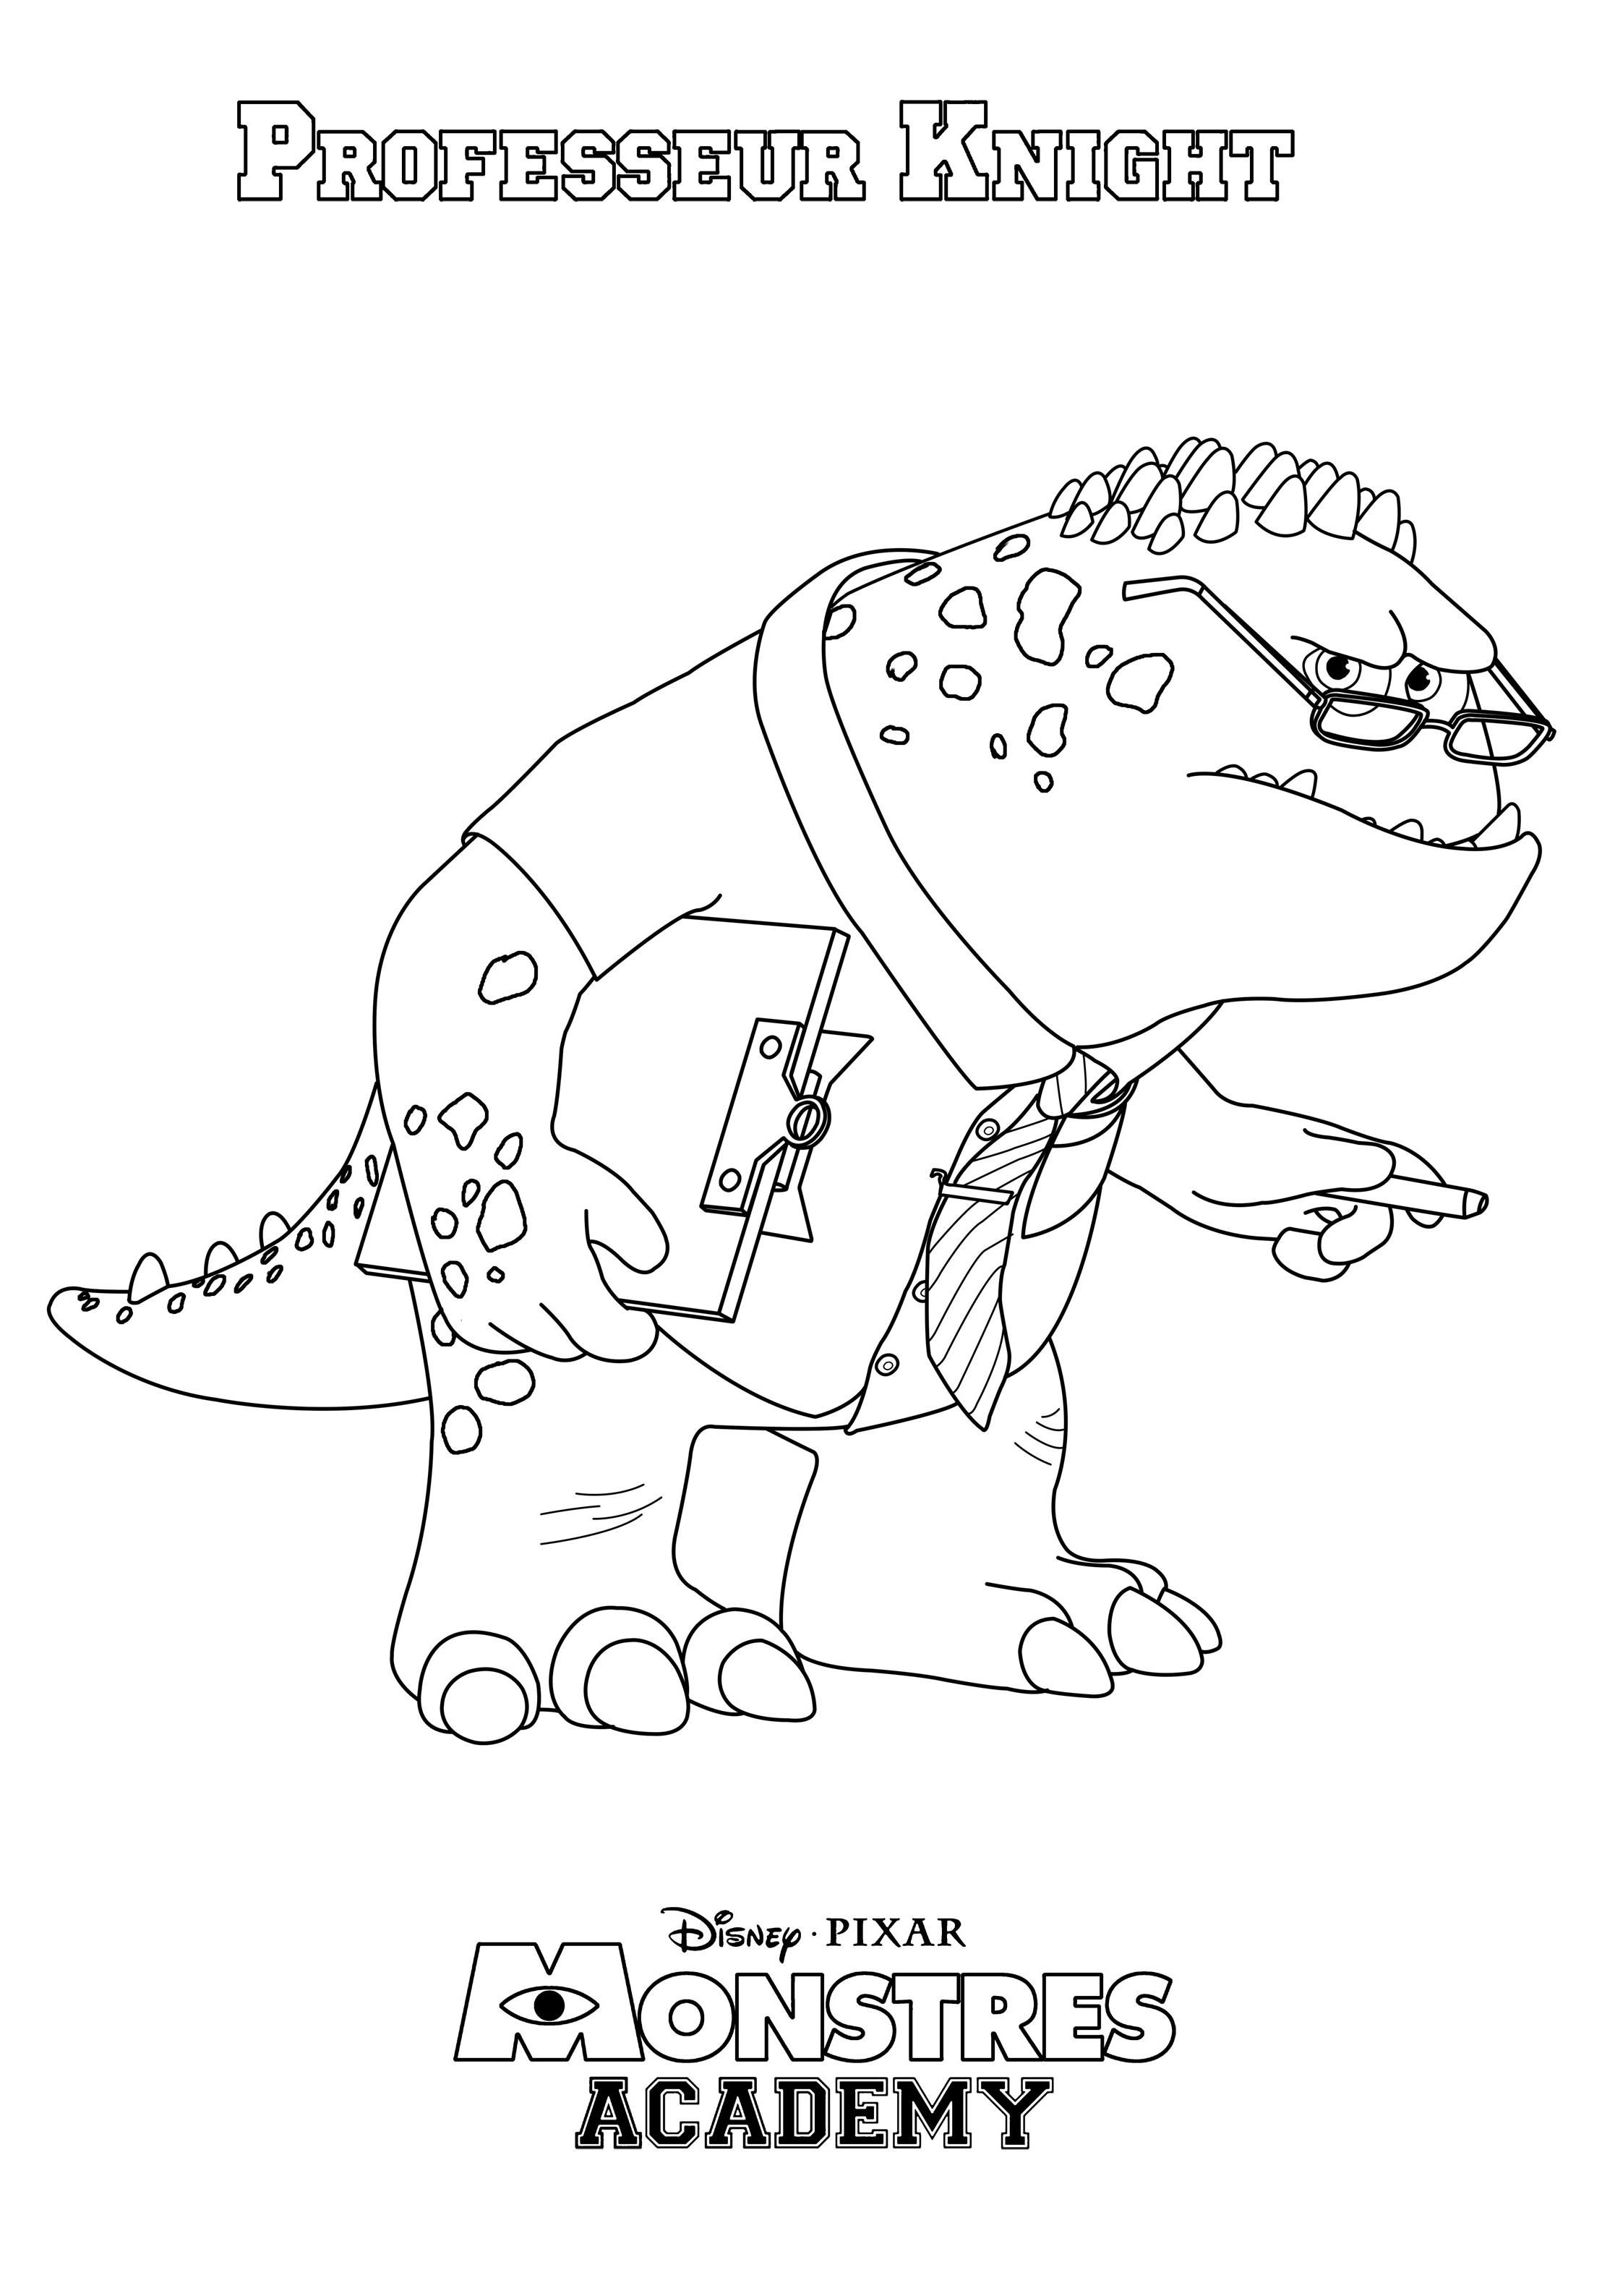 Monsters Inc Mike Wazowski Coloring Page: Monsters University ...